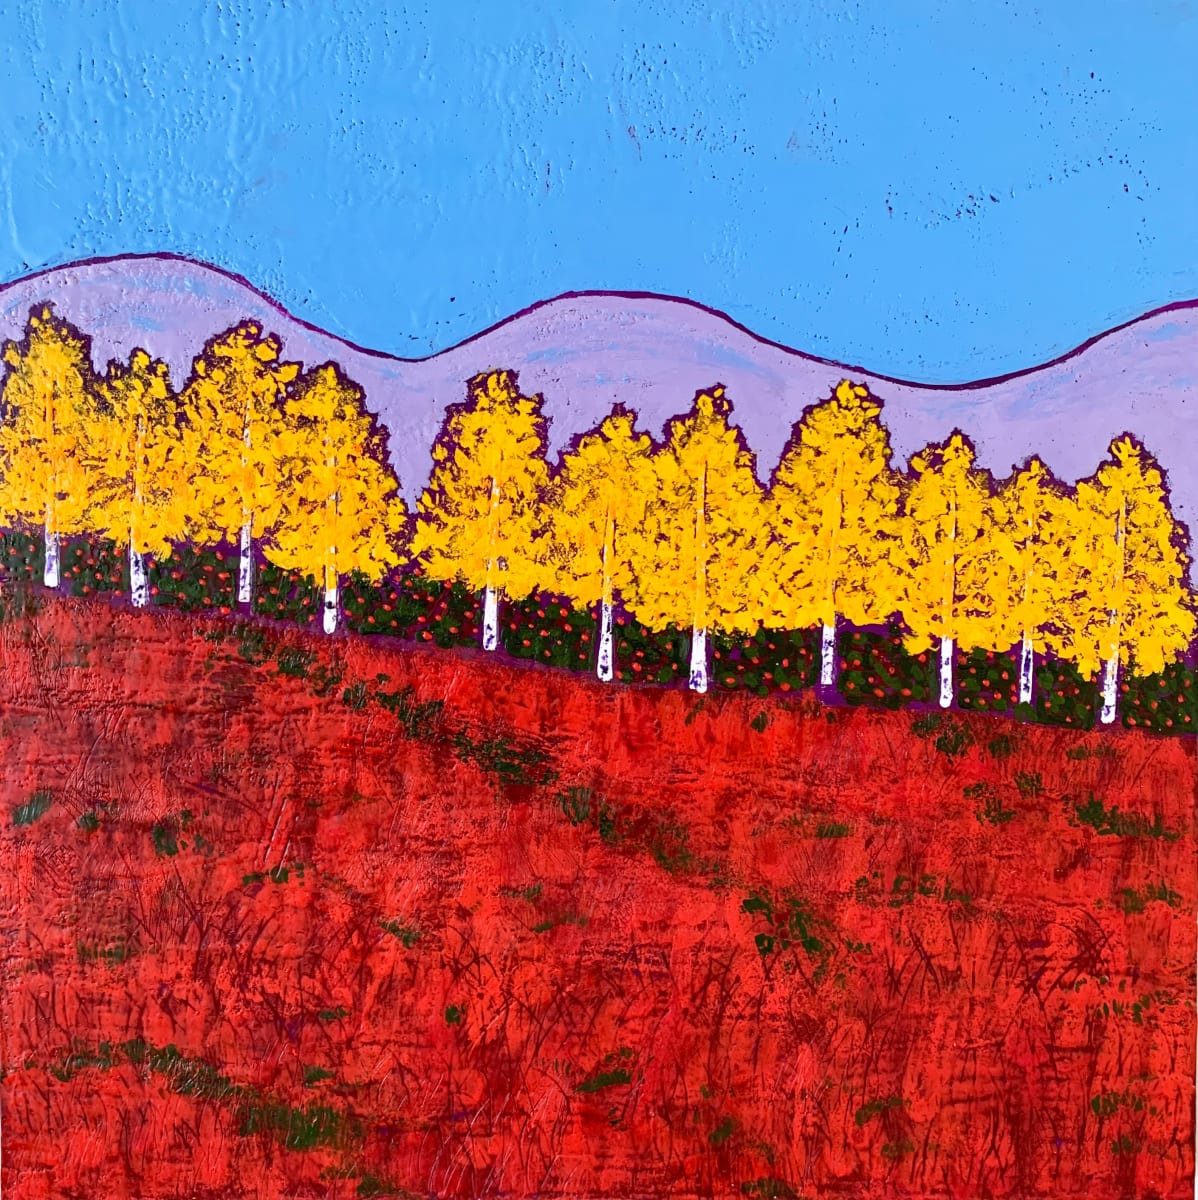 Birches by the Barrens by Marcia Crumley 